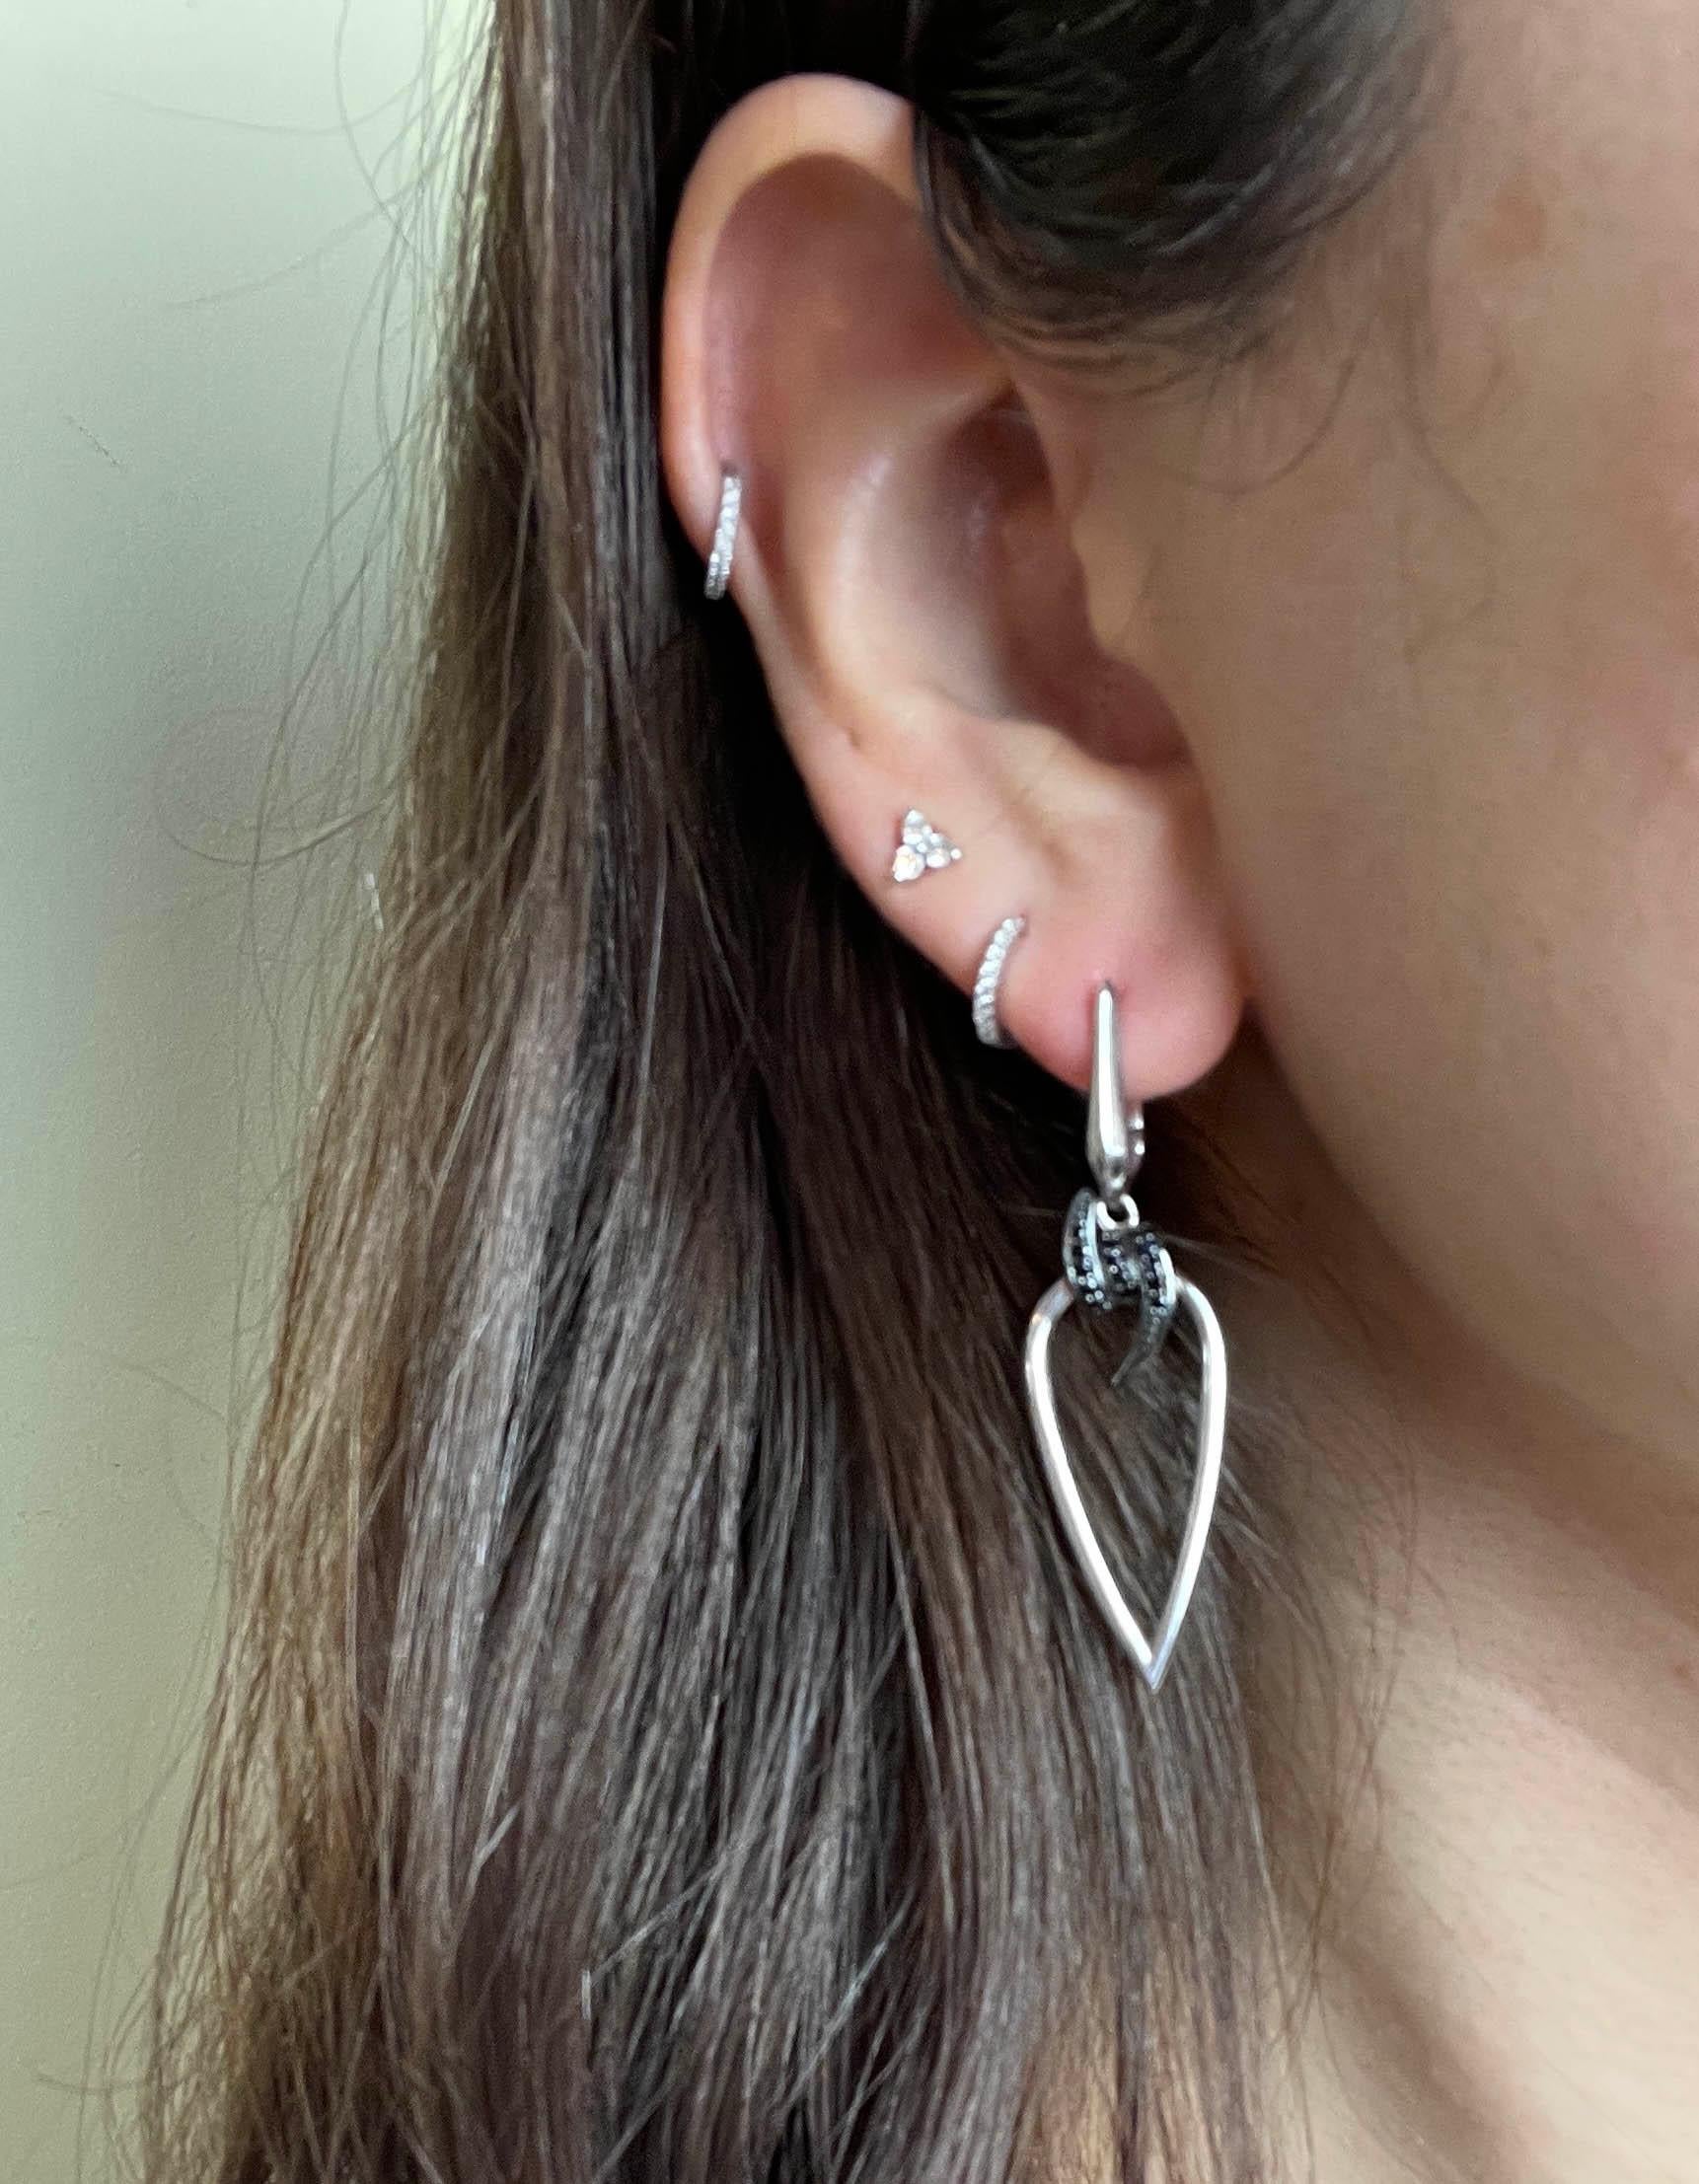 Stephen Webster Sterling Silver & Black Sapphire Barb Wire Drop Pierced Earrings

Materials: Sterling silver and black sapphire
Hallmarks: 925, designer hallmark
Closure/Opening: Pierced
Overall Condition: Excellent 
Includes: Stephen Webster